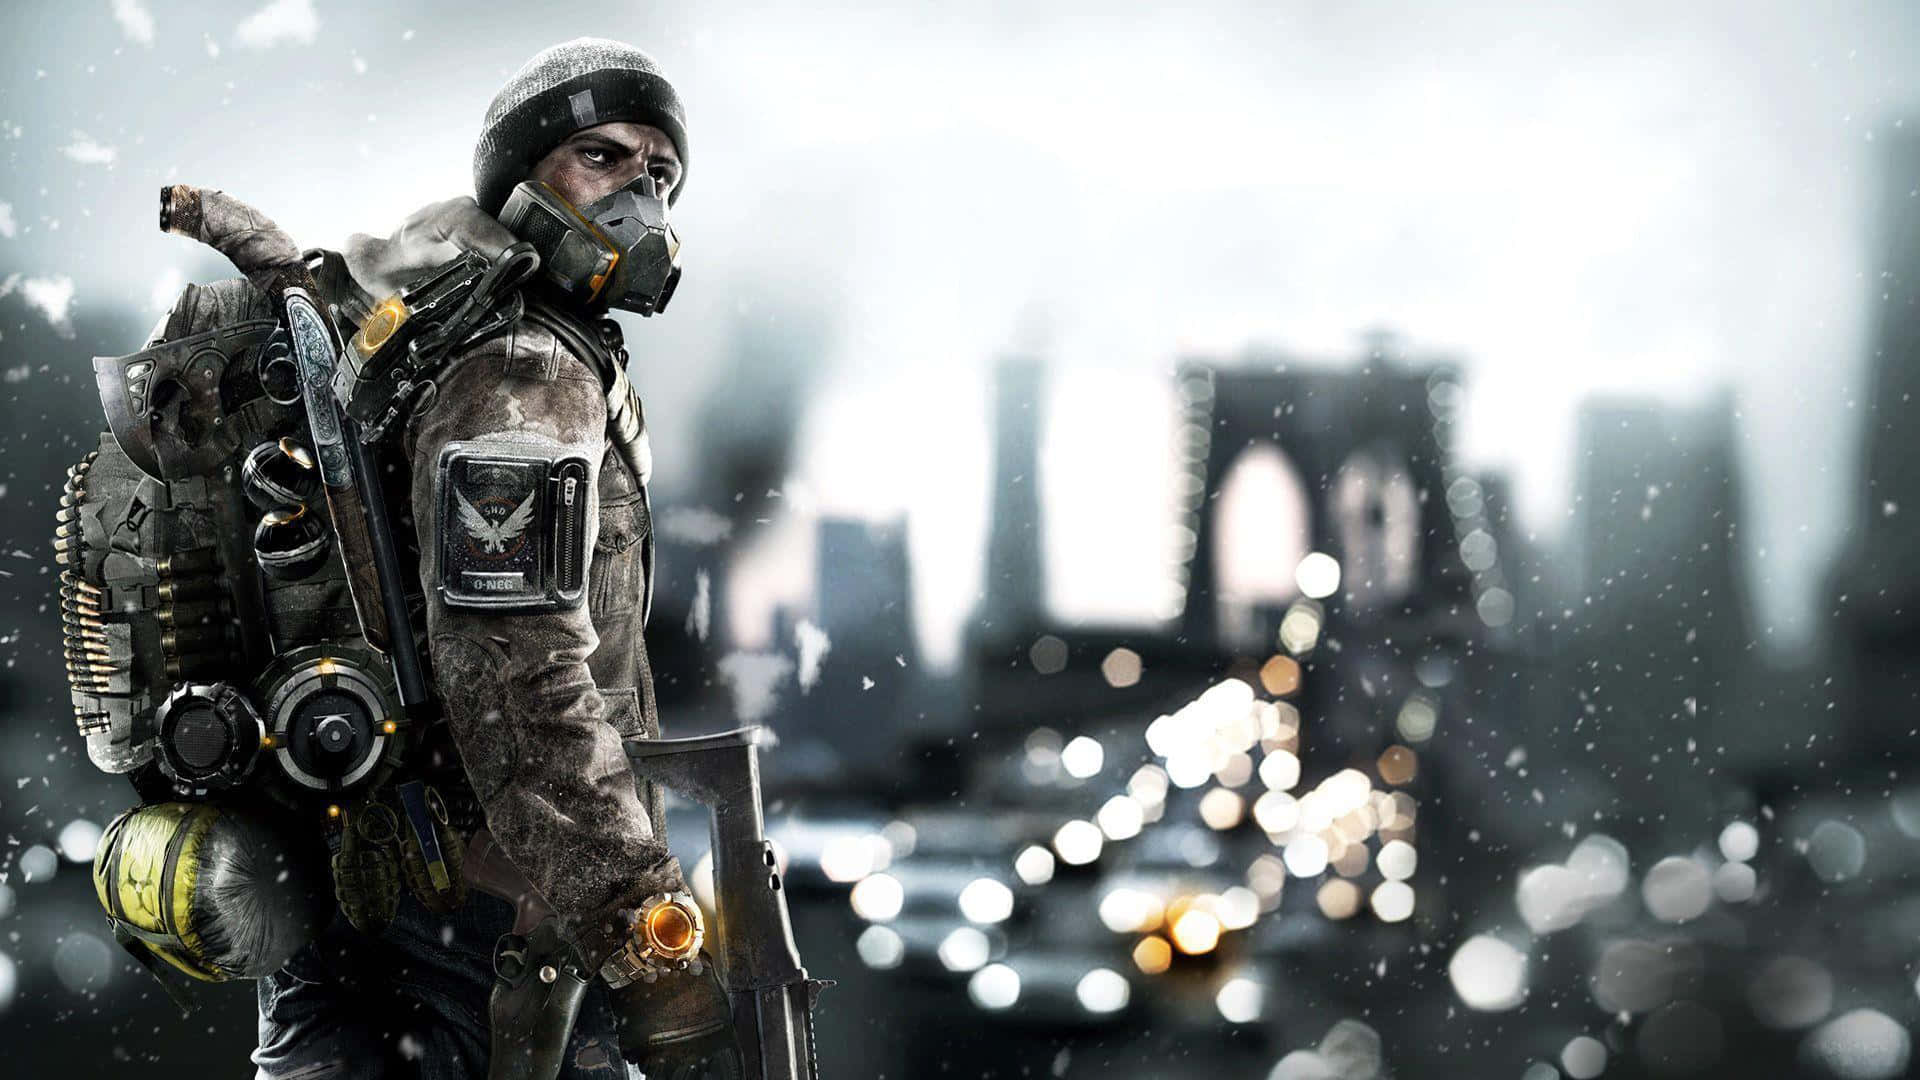 Put your strategy skills to the test in Tom Clancy's The Division Wallpaper